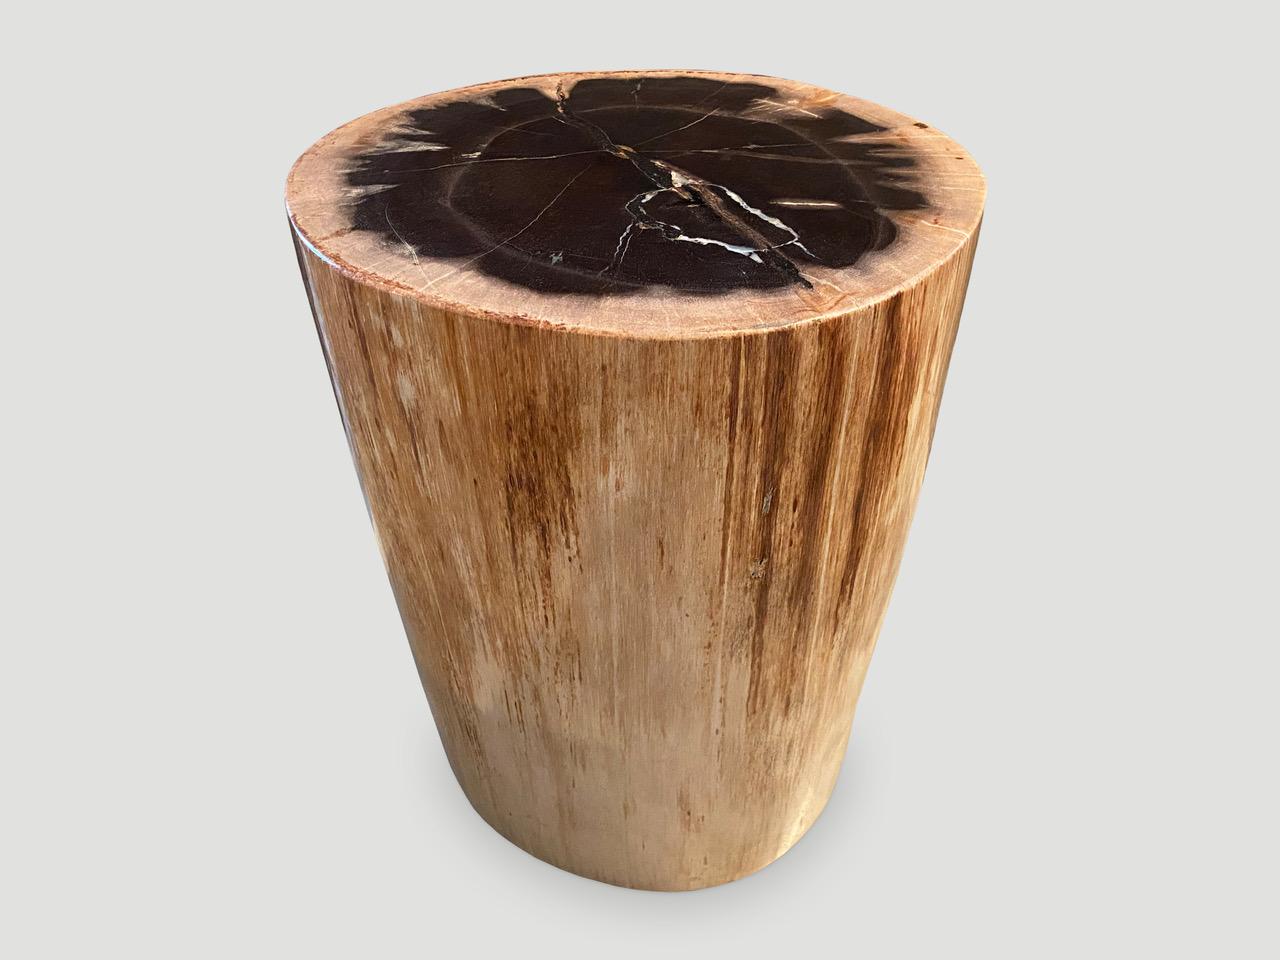 Stunning unusual contrasting colors in this beautiful round petrified wood side table. It’s fascinating how Mother Nature produces these exquisite 40 million year old petrified teak logs with such contrasting colors and natural patterns throughout.